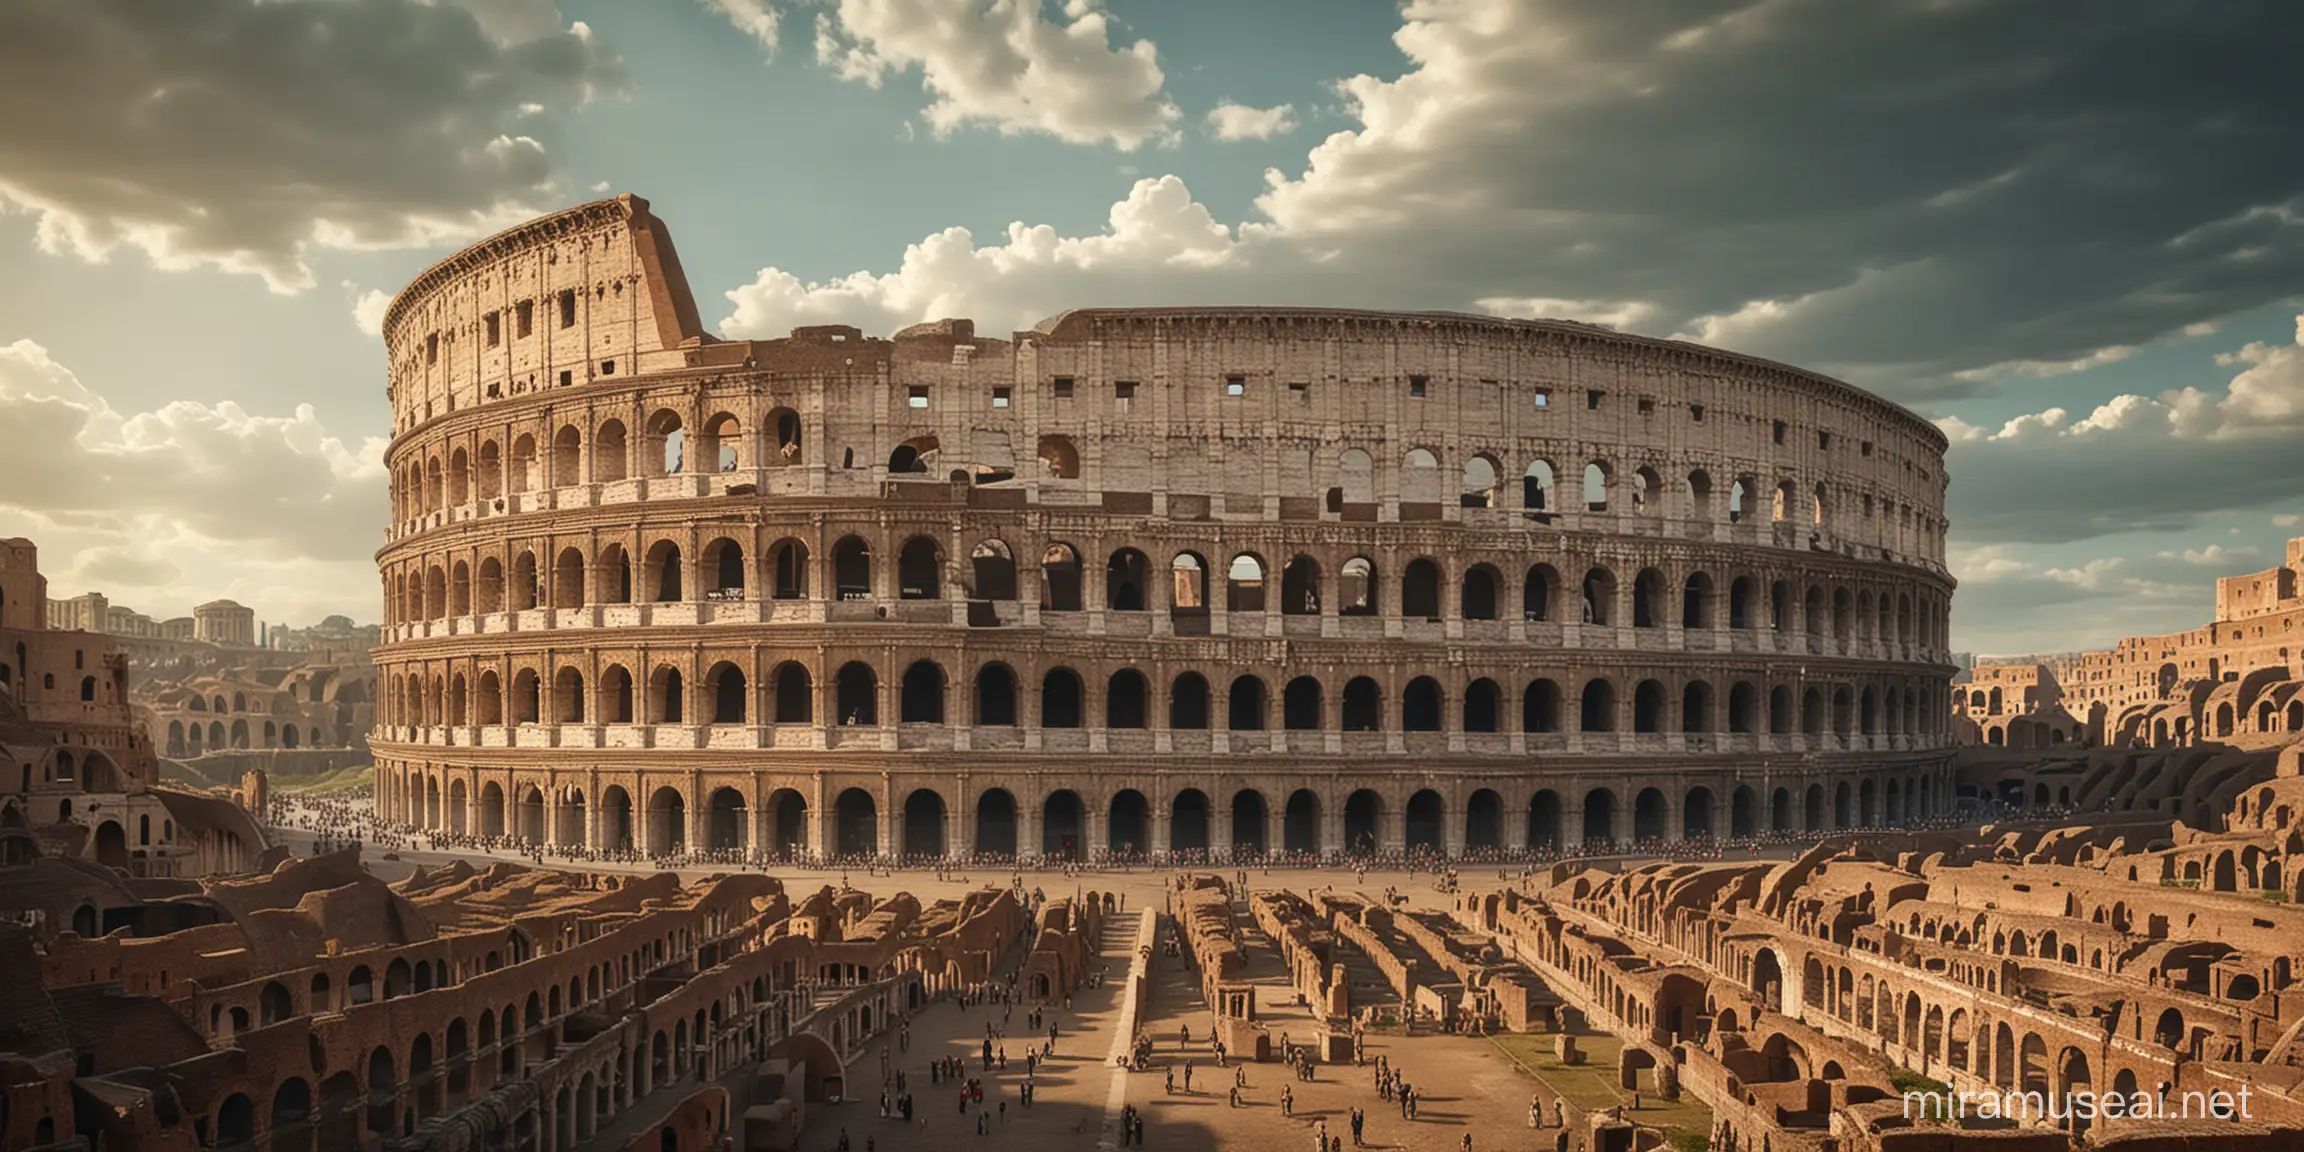 Spectacular Sunset View of the Roman Colosseum